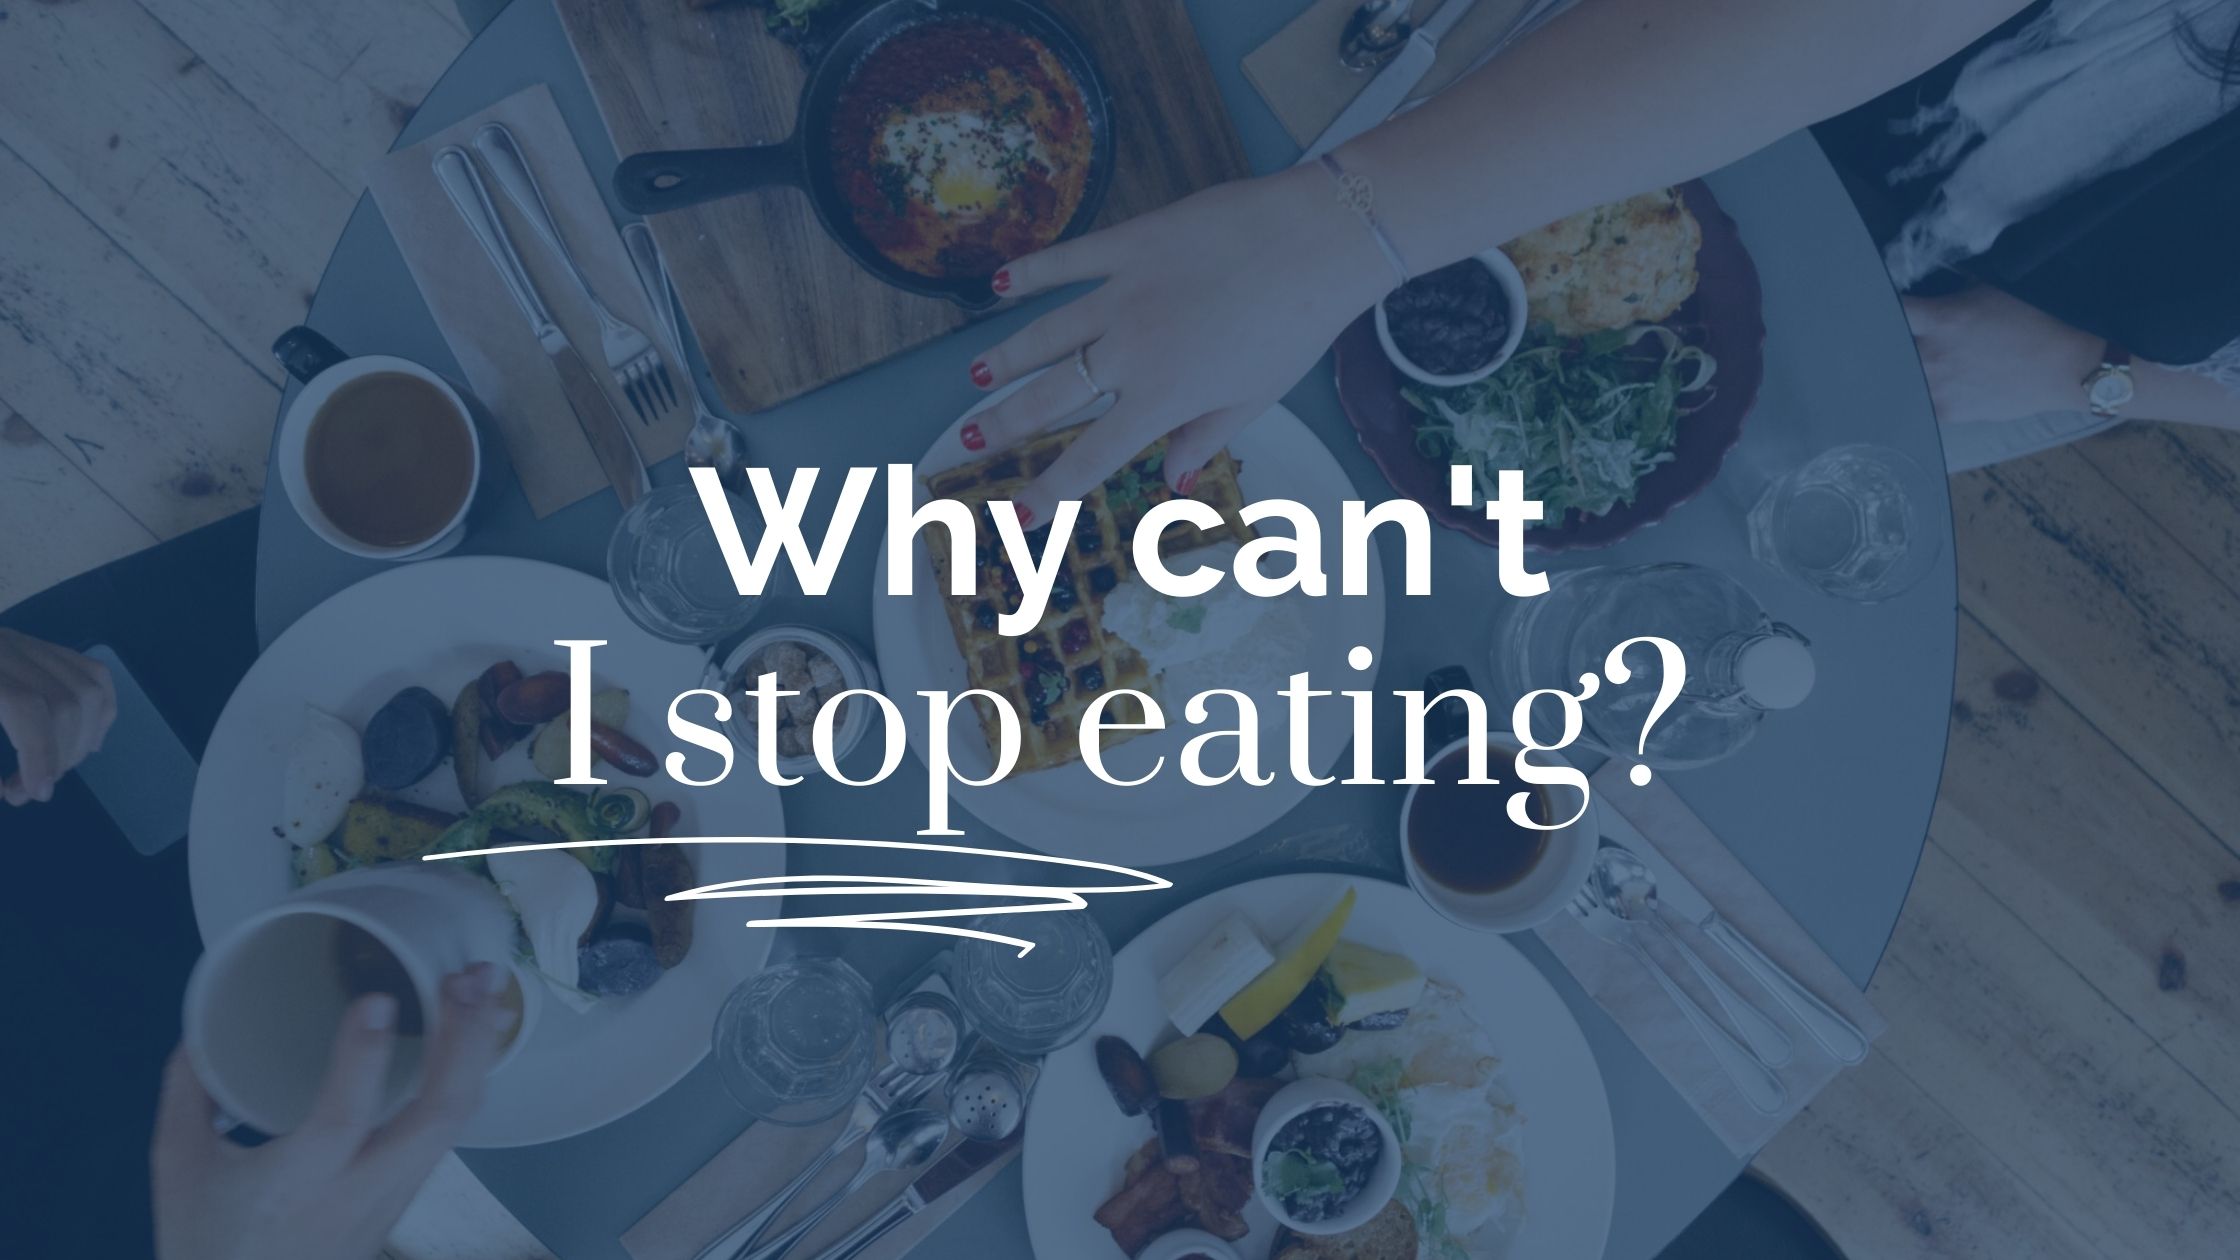 Why can't I stop eating?